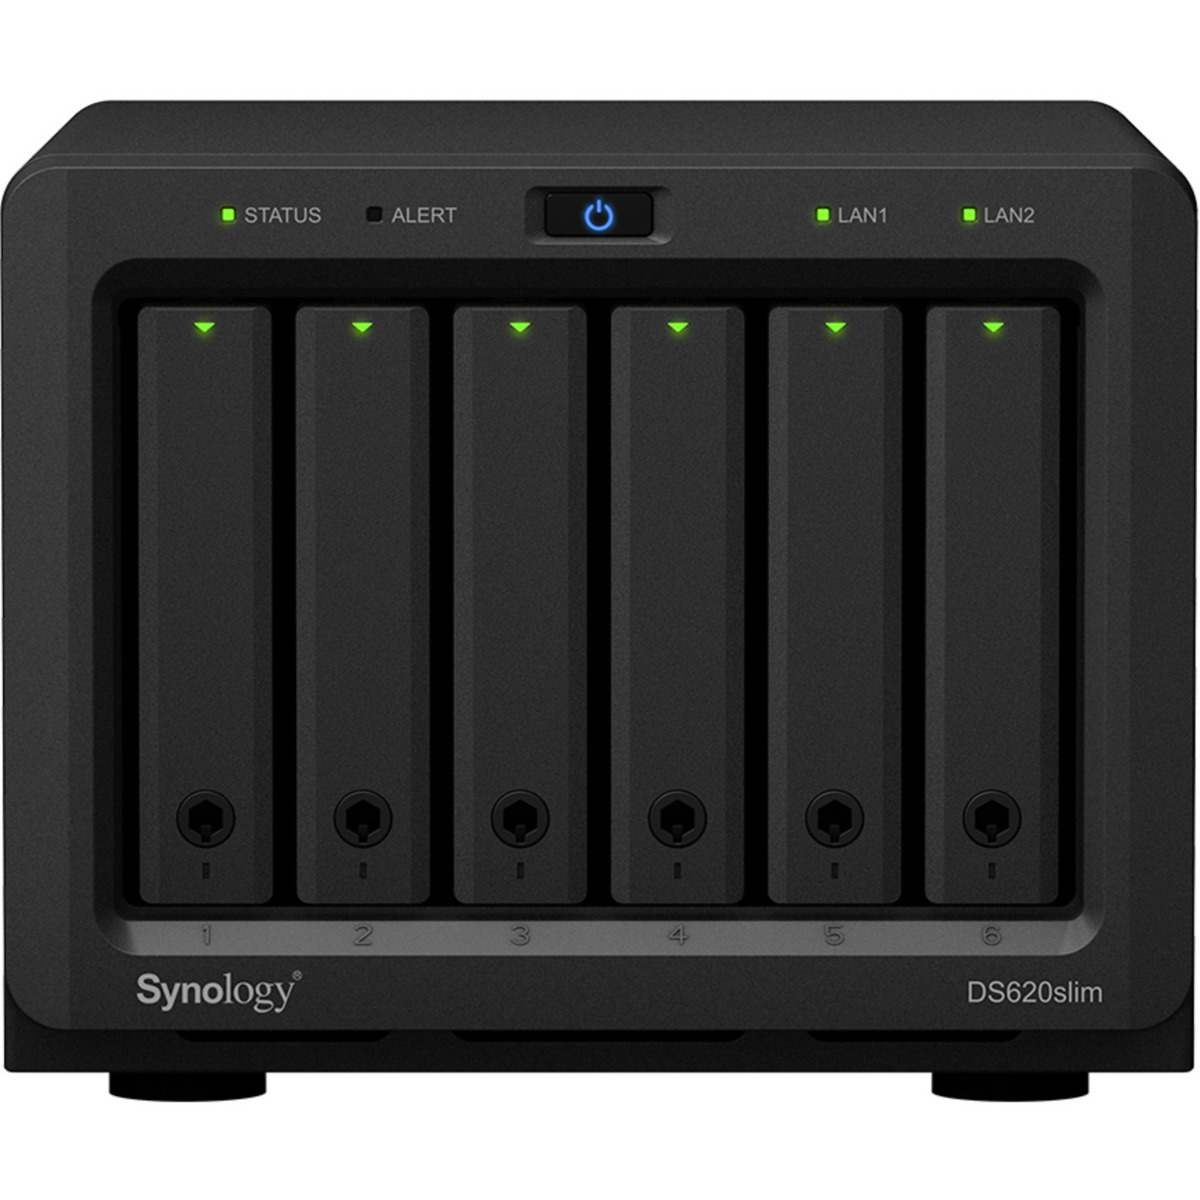 buy $2063 Synology DiskStation DS620slim 12tb Desktop NAS - Network Attached Storage Device 6x2000gb Western Digital Red SA500 WDS200T1R0A 2.5 560/530MB/s SATA 6Gb/s SSD NAS Class Drives Installed - Burn-In Tested - FREE RAM UPGRADE - nas headquarters buy network attached storage server device das new raid-5 free shipping usa DiskStation DS620slim